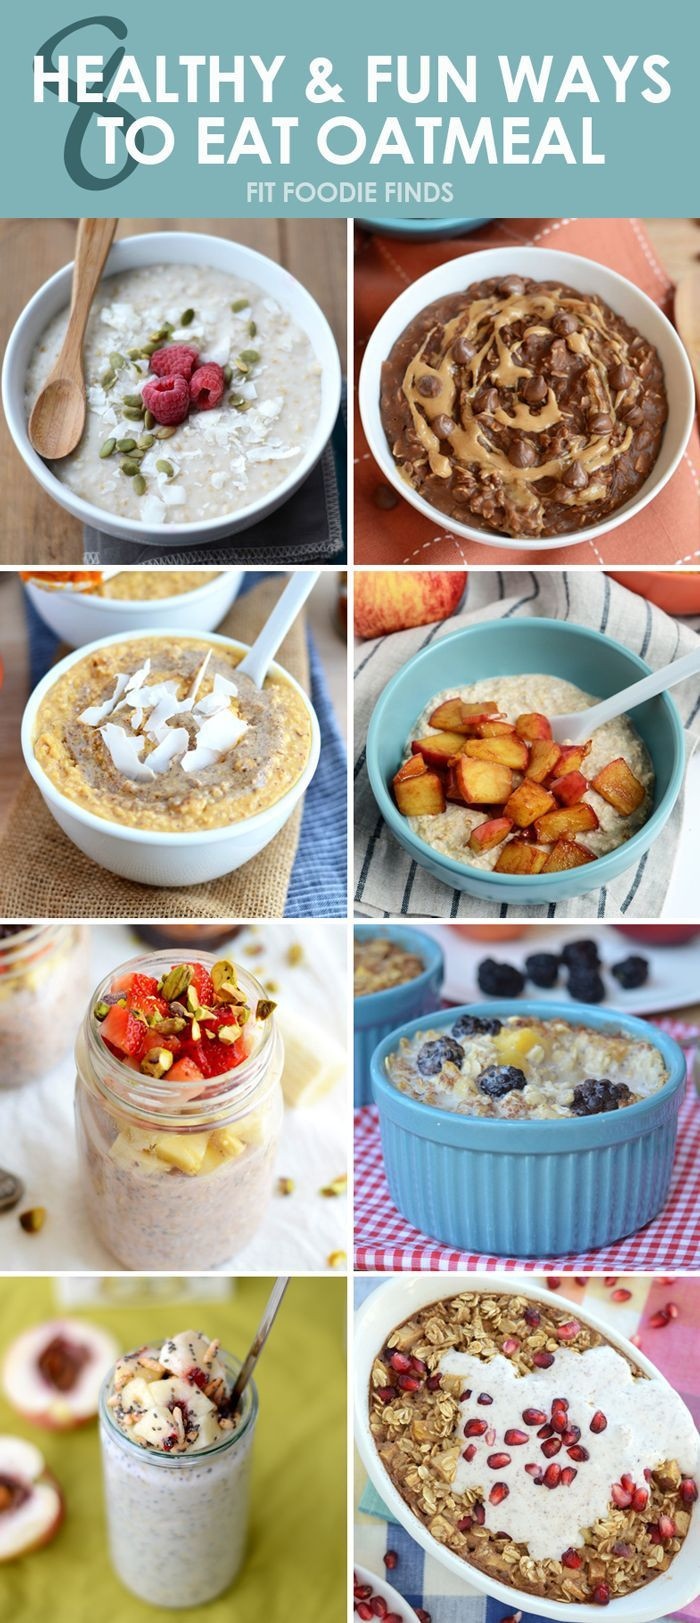 Quick Snacks With Oats
 8 Healthy and Fun Ways to Eat Oatmeal recipe healthy